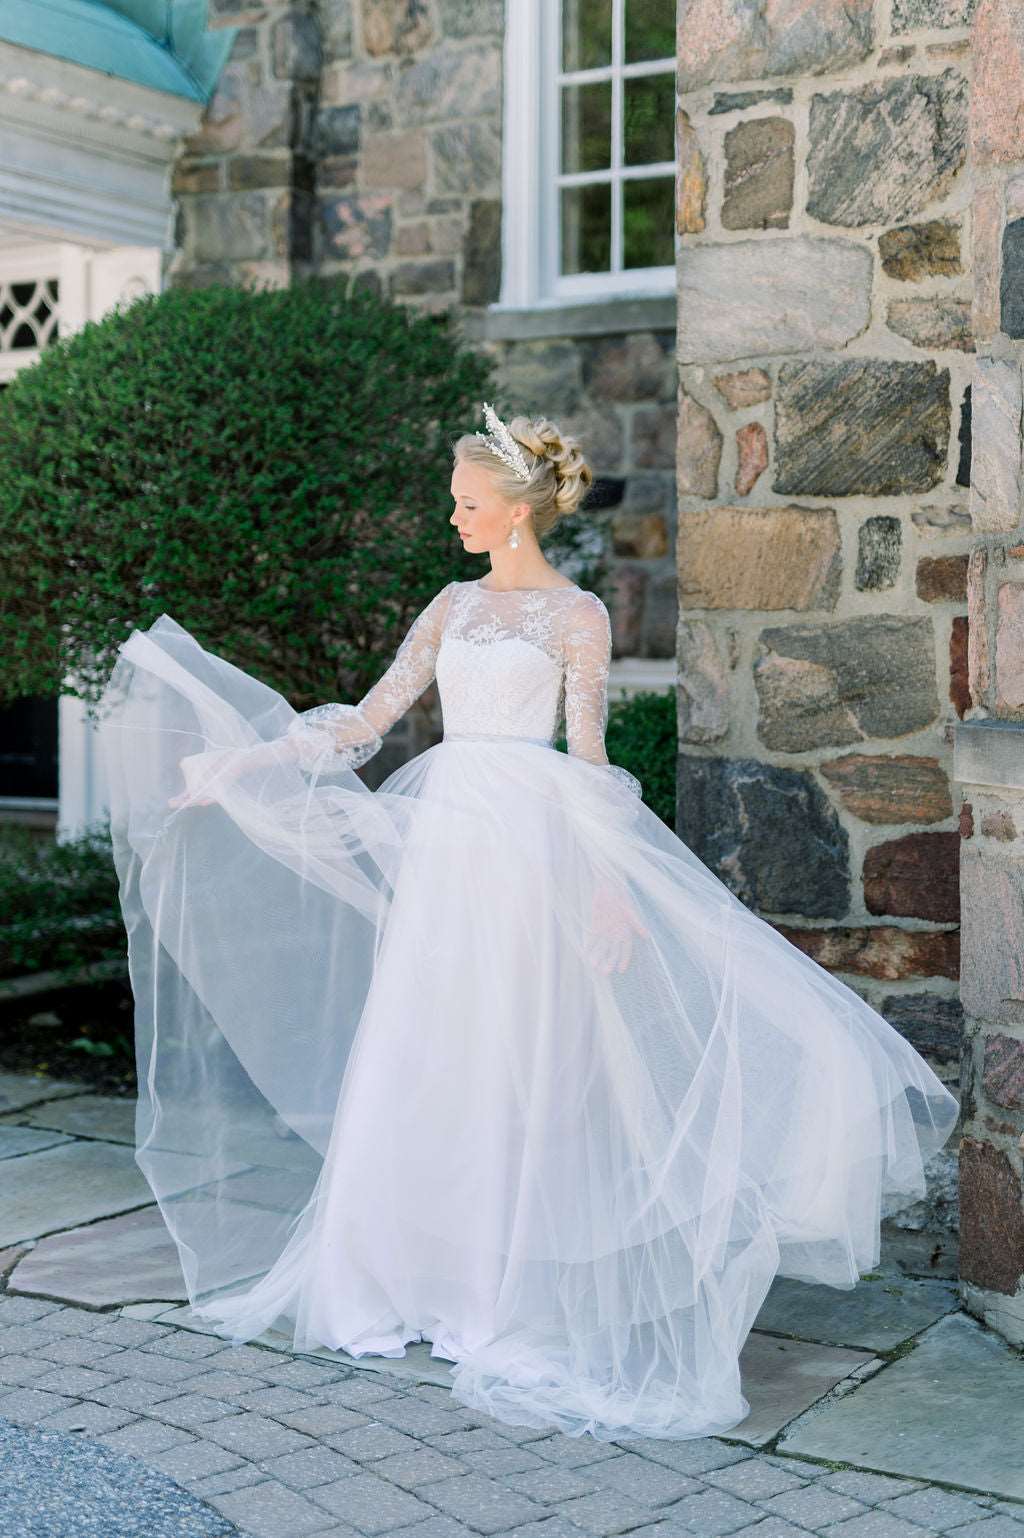 Romantic tulle wedding dress with boat neckline and long lace sleeves. Custom designed by Catherine Langlois, Toronto, Ontario, Canada.